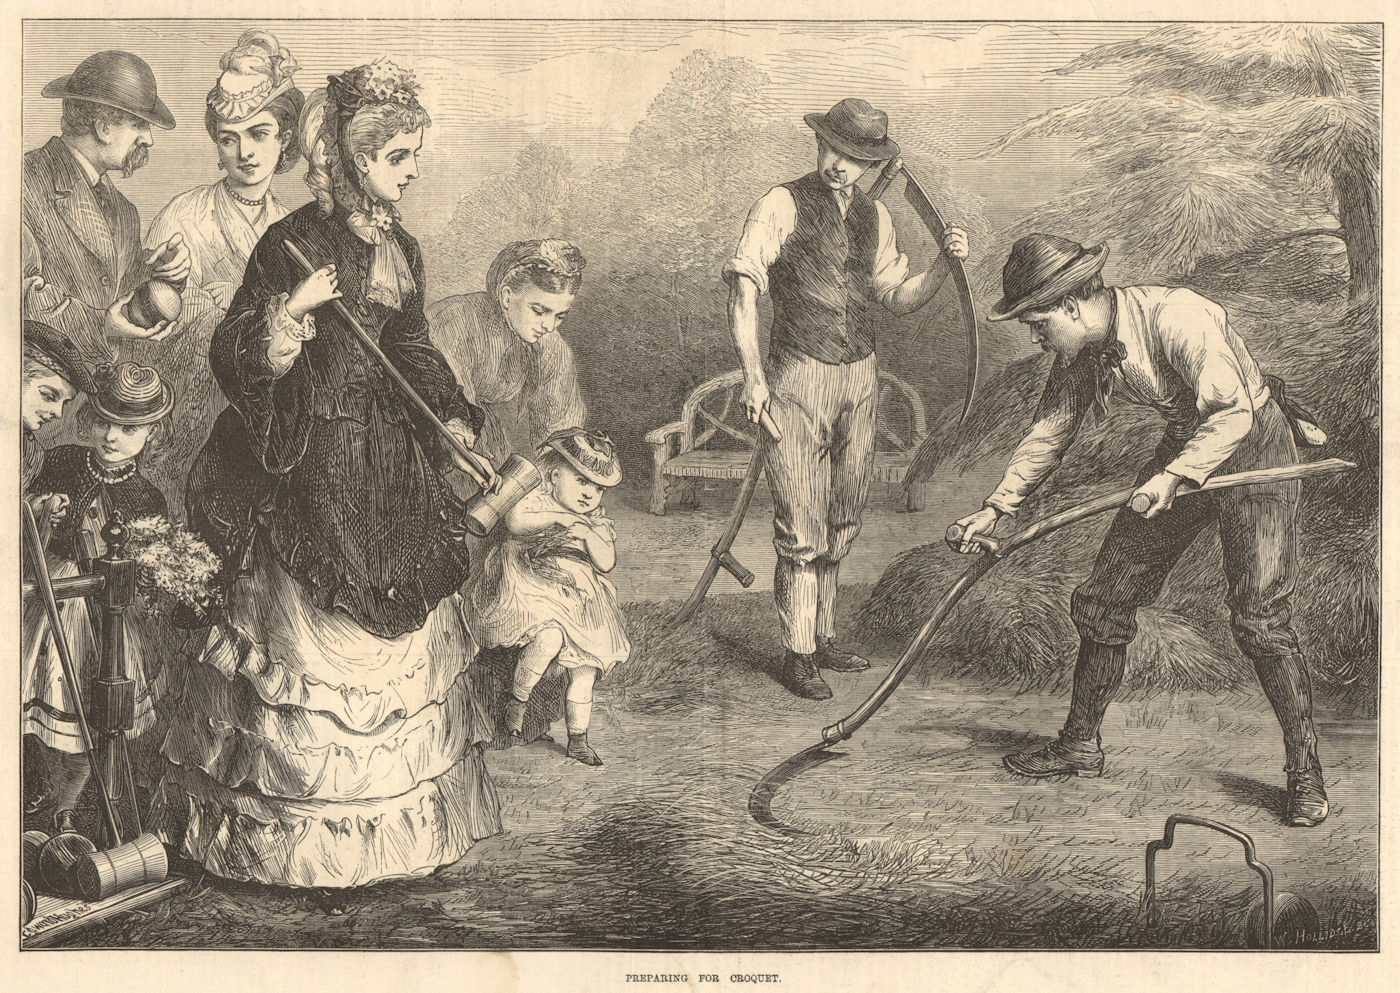 Preparing for croquet. Family. Sports. Scything the lawn 1871 old print